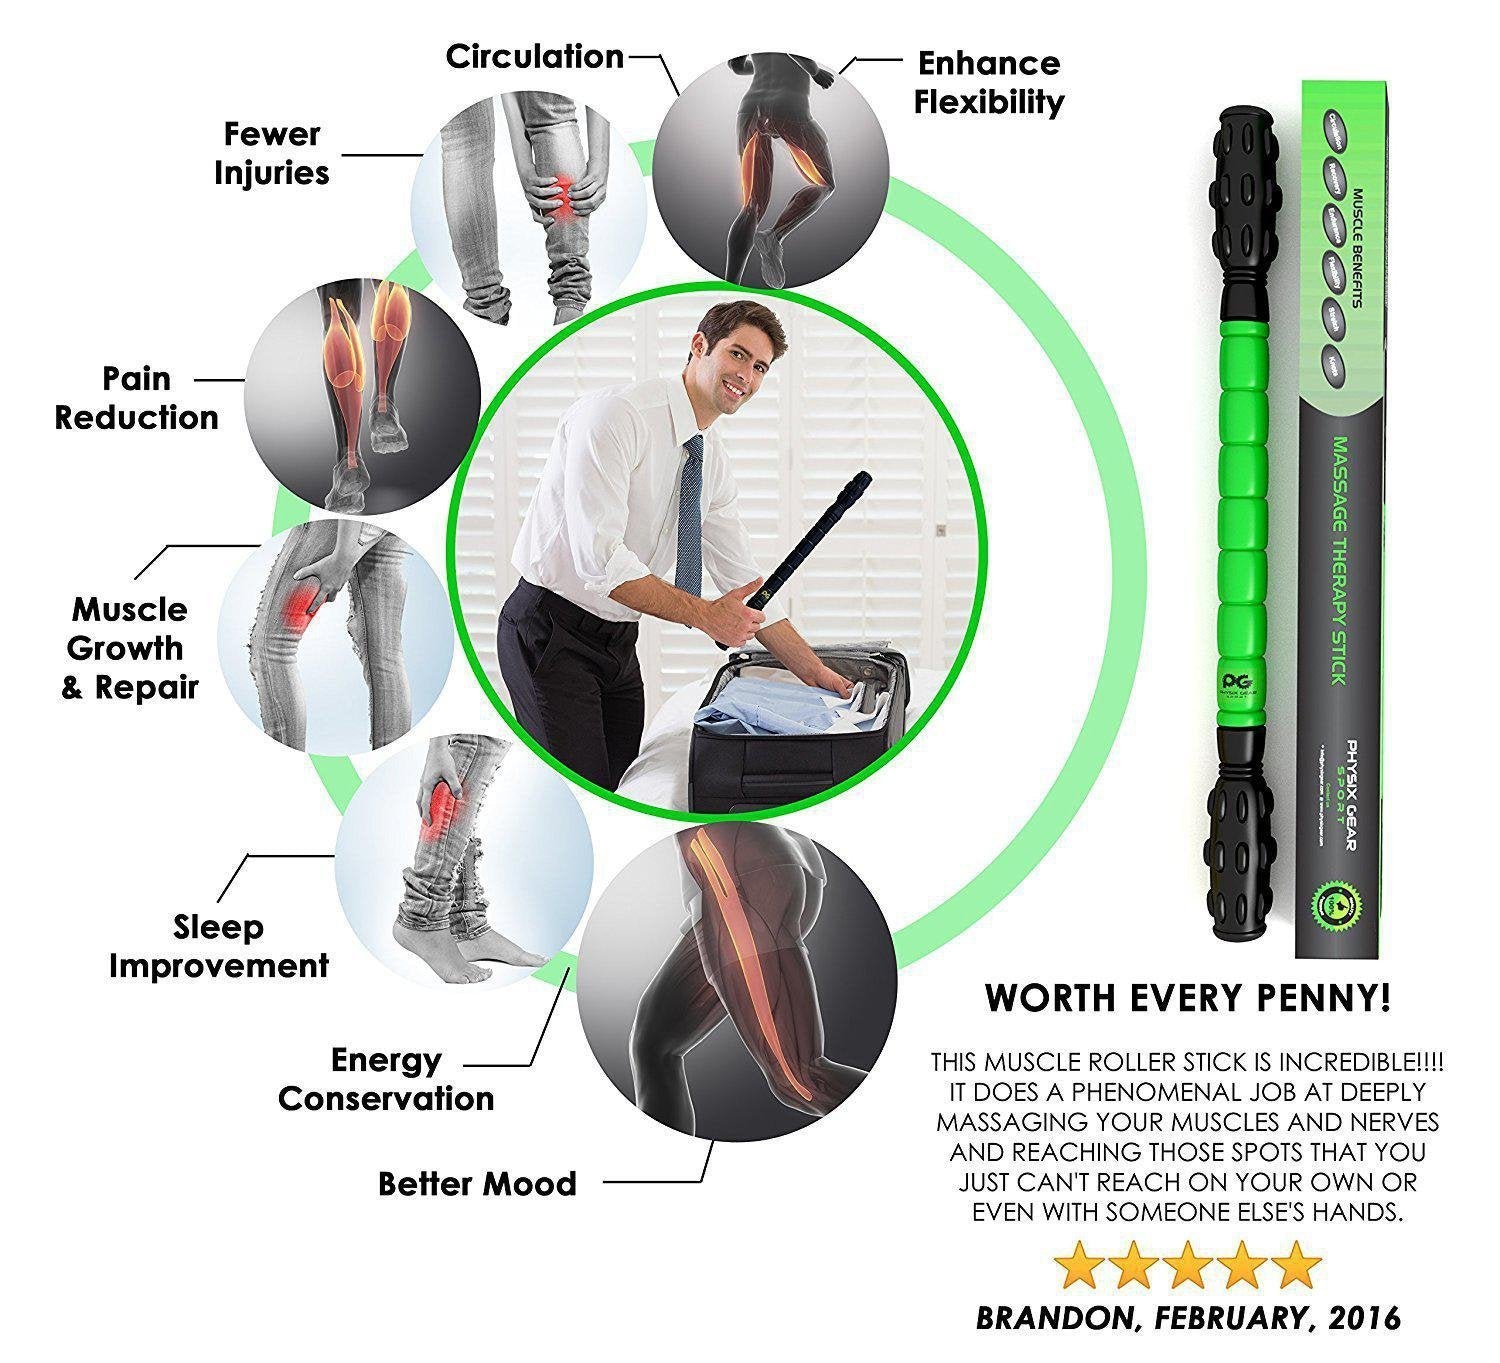 Buy top quality massage roller to get relief from pain-Physix Gear Sport